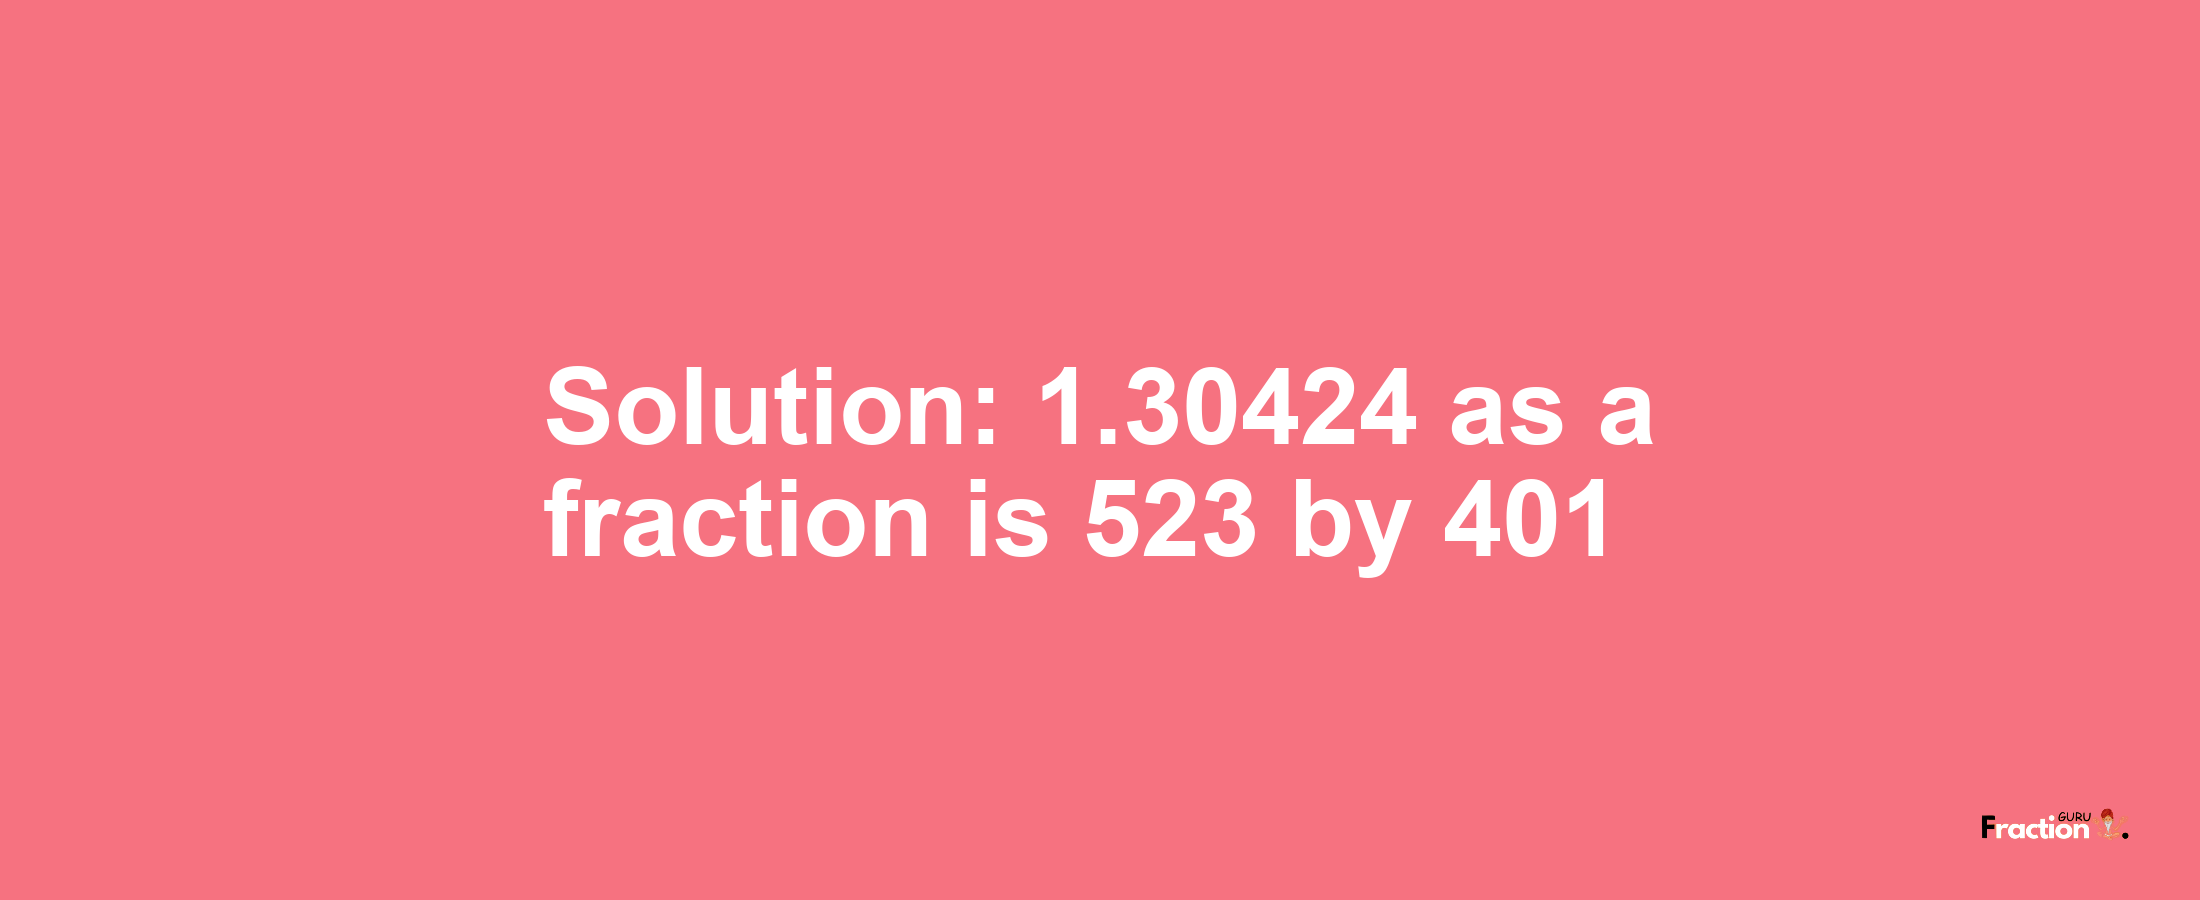 Solution:1.30424 as a fraction is 523/401